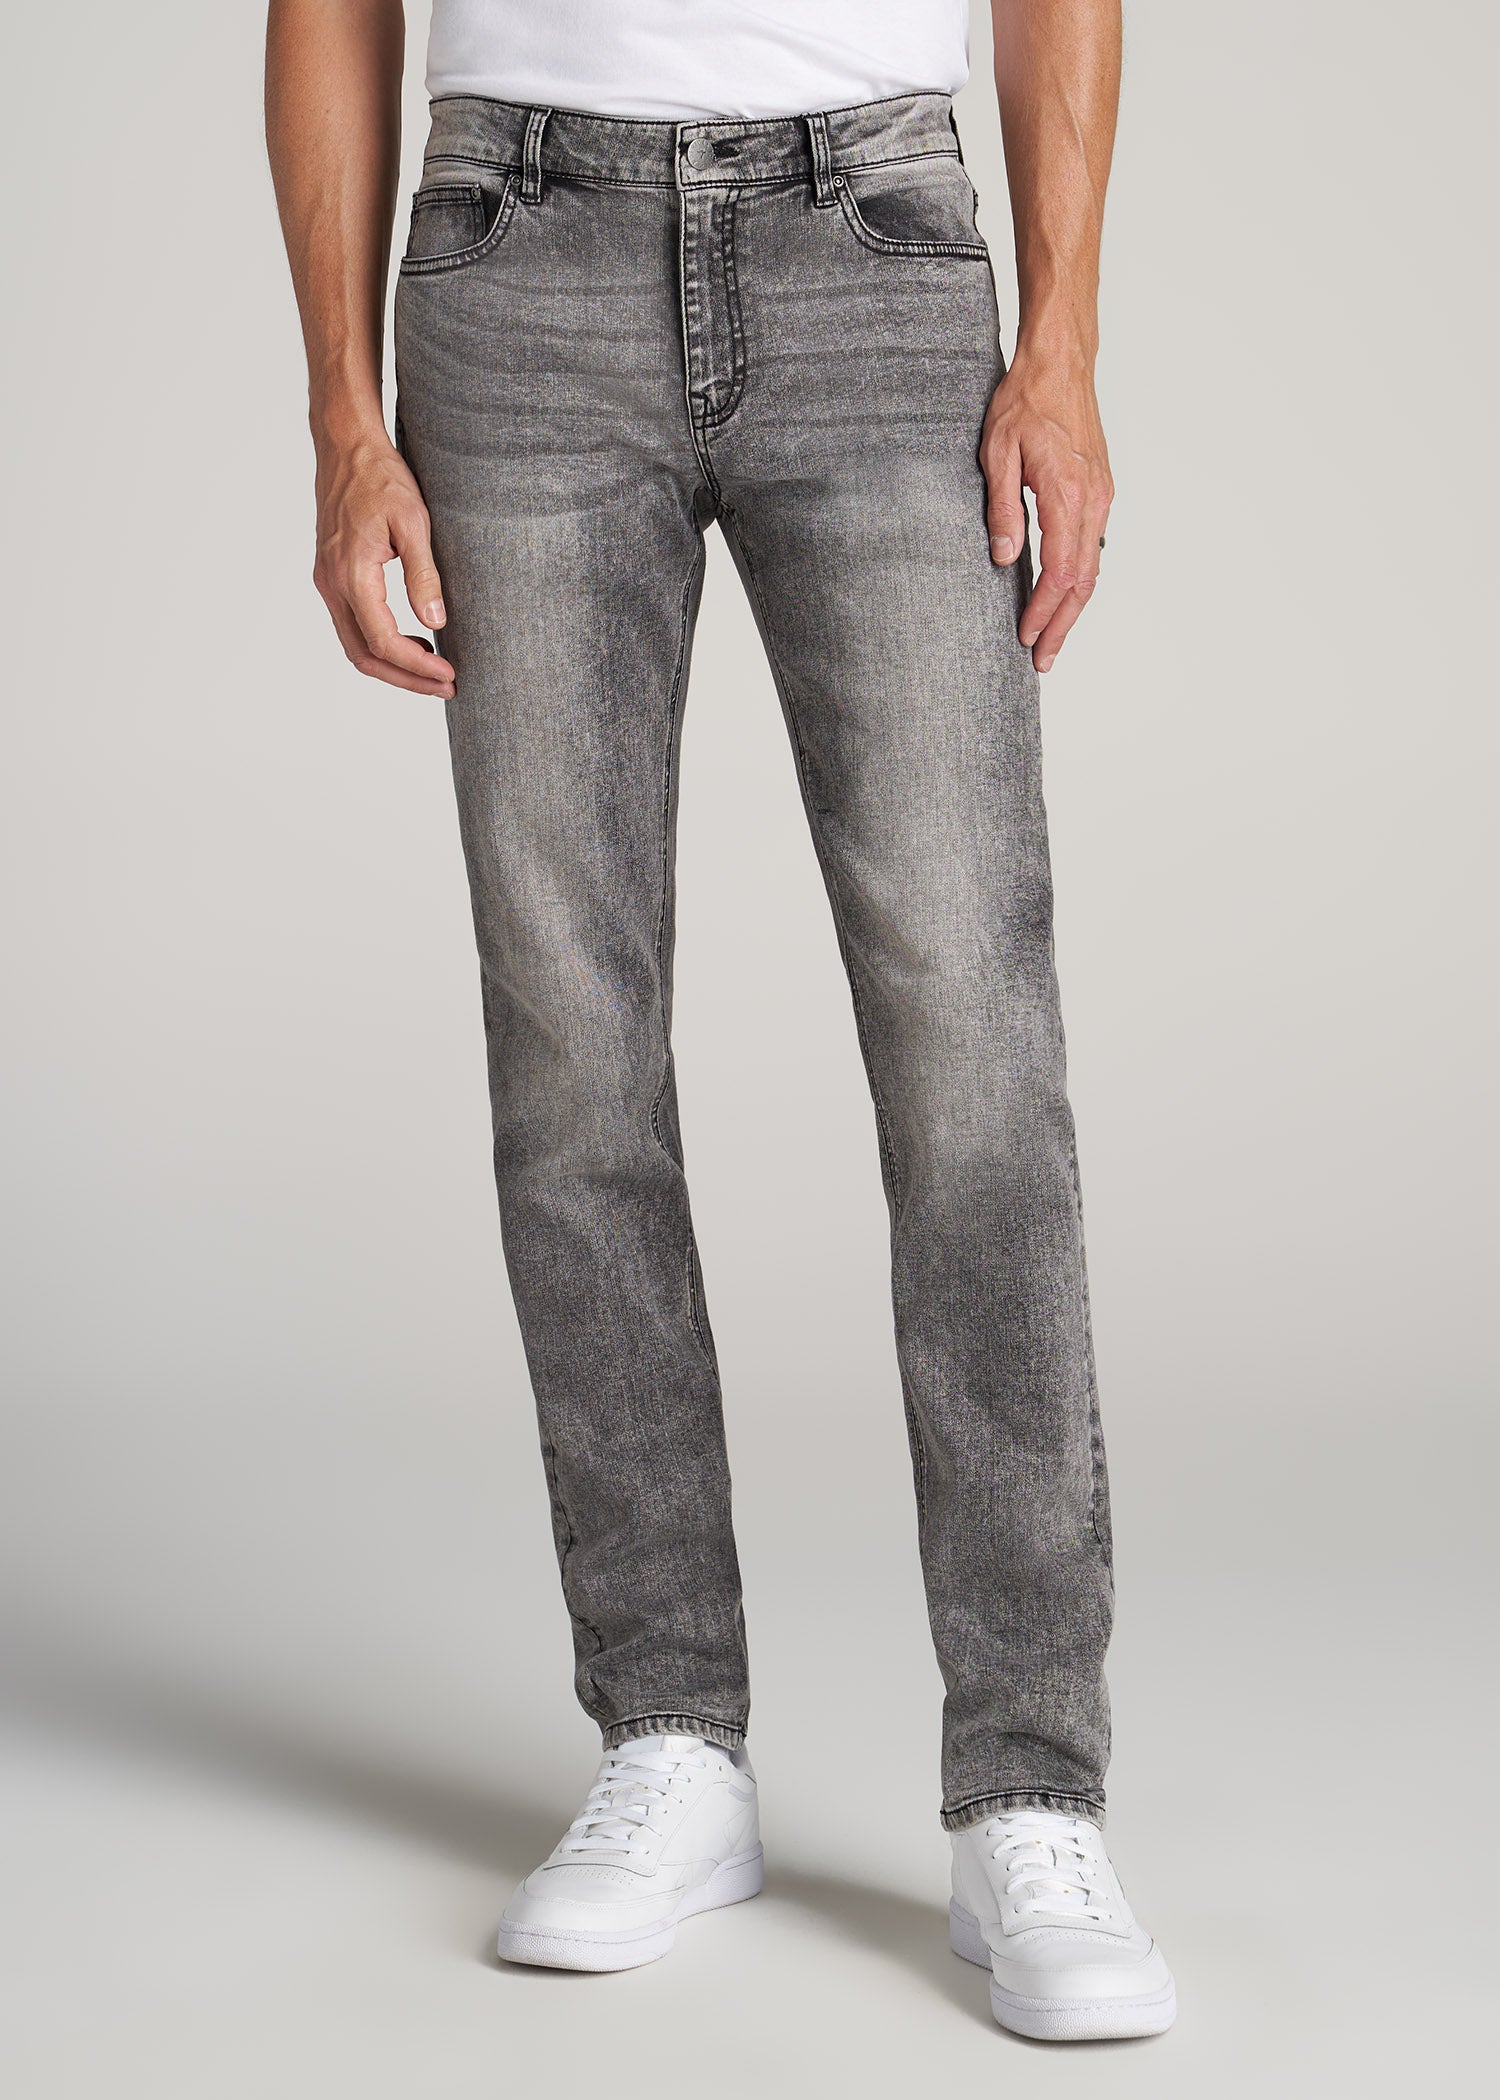 Dylan SLIM-FIT Jeans for Tall Men in Washed Faded Black